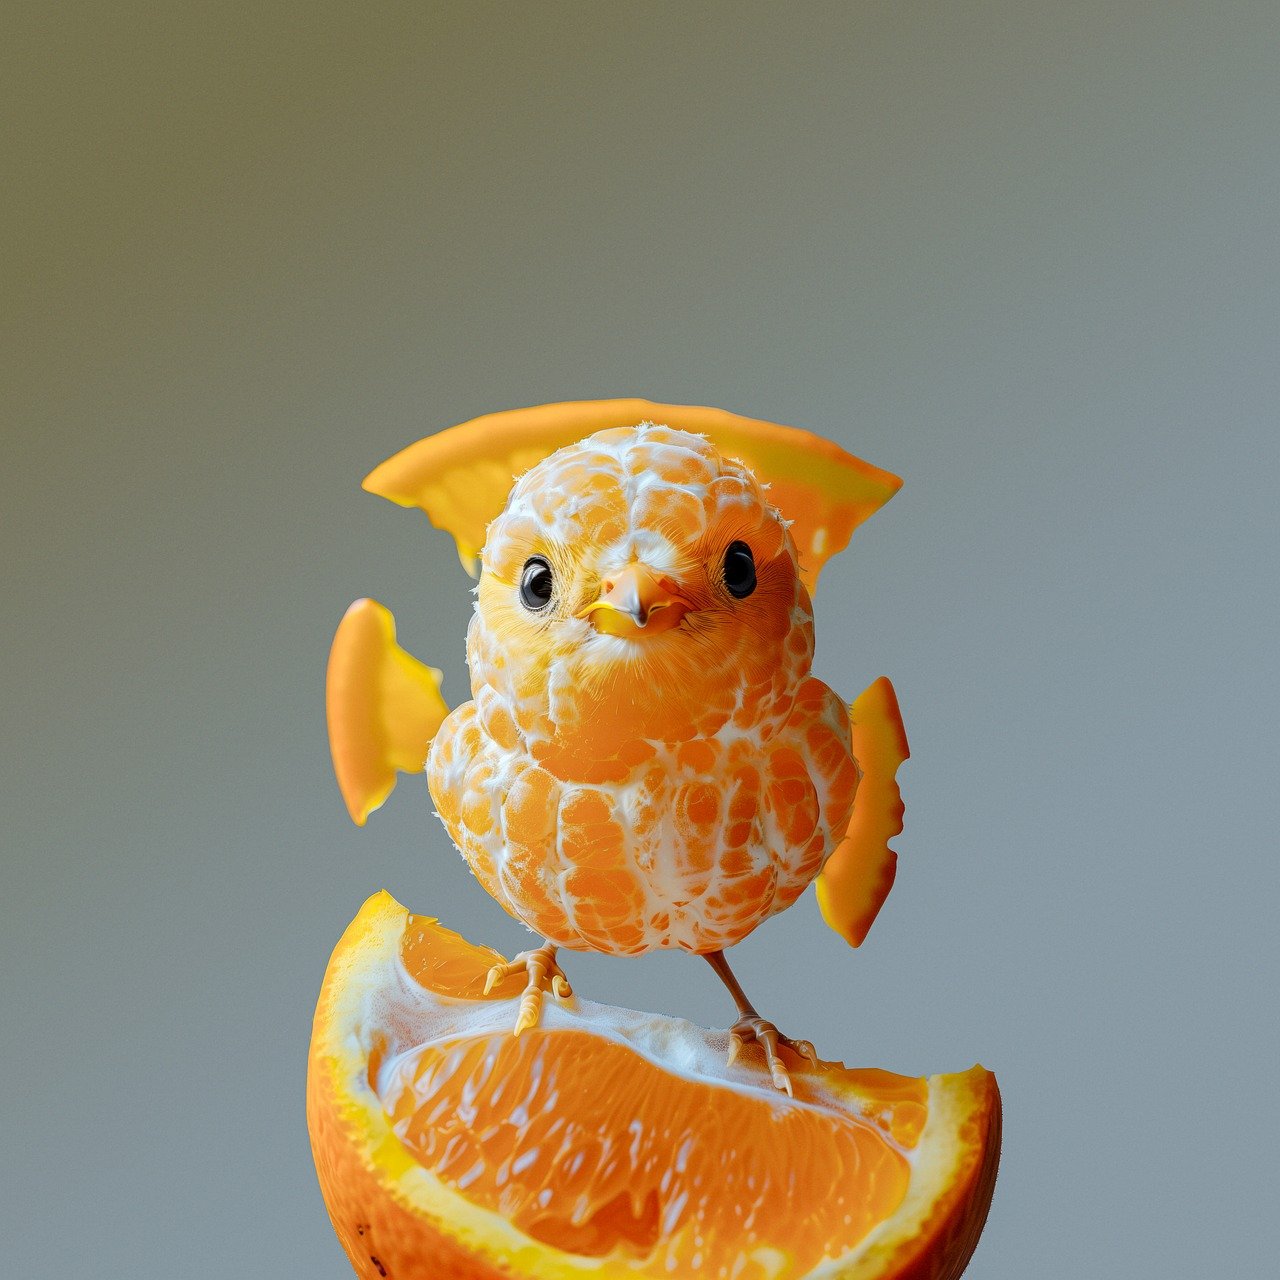 AI image of a bird made out of an orange peel